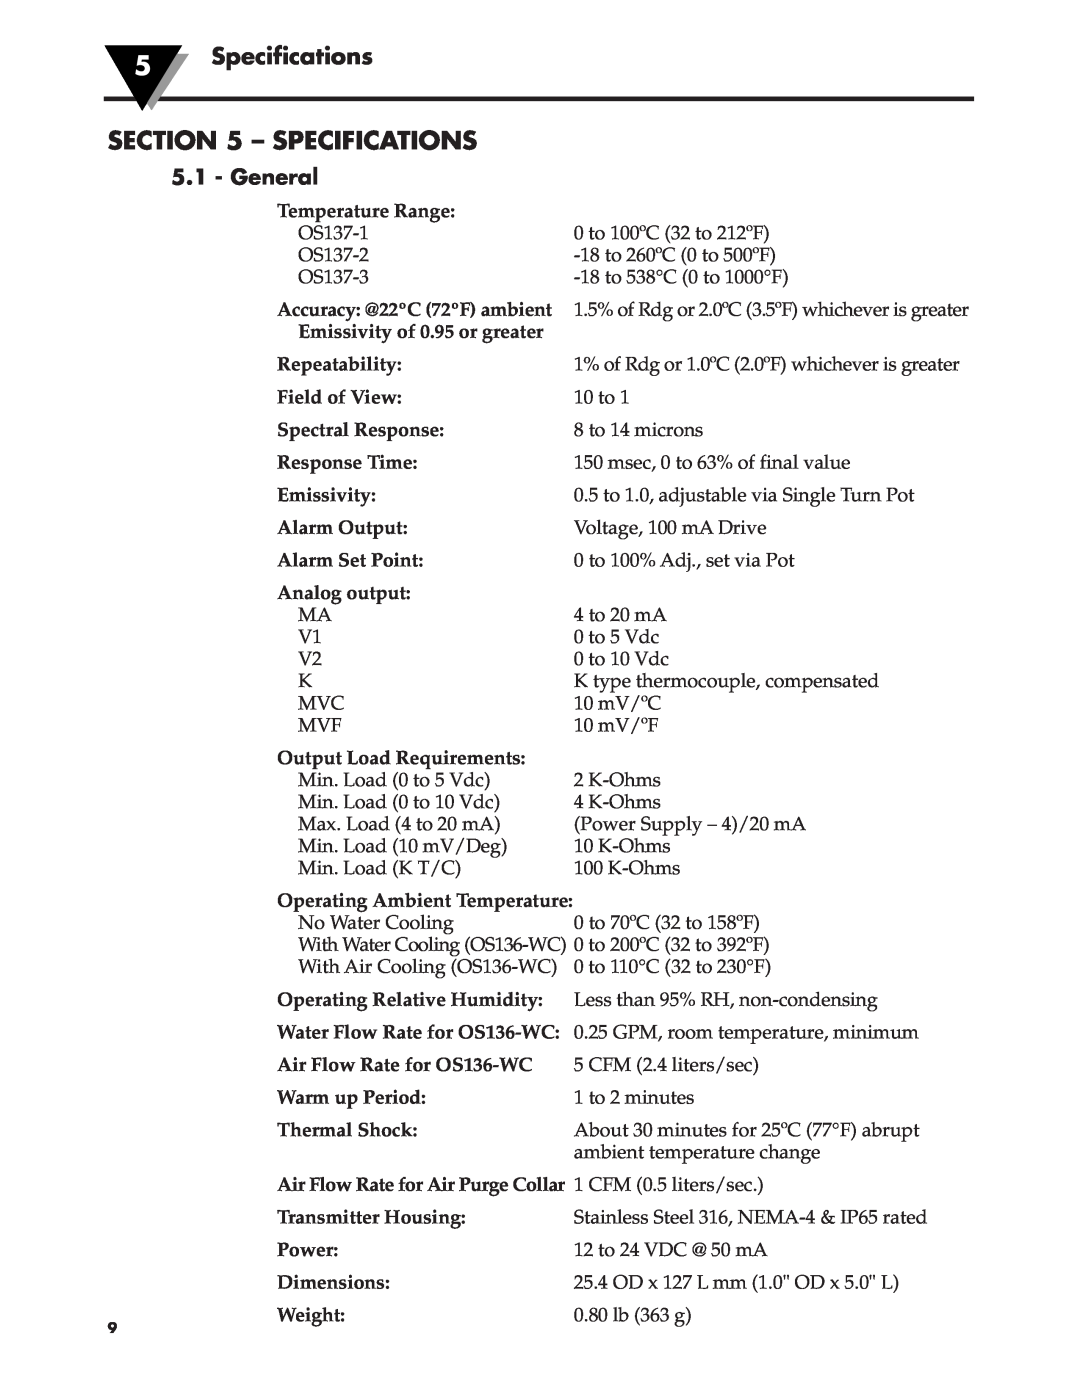 Omega OS137 manual 5Specifications, General 